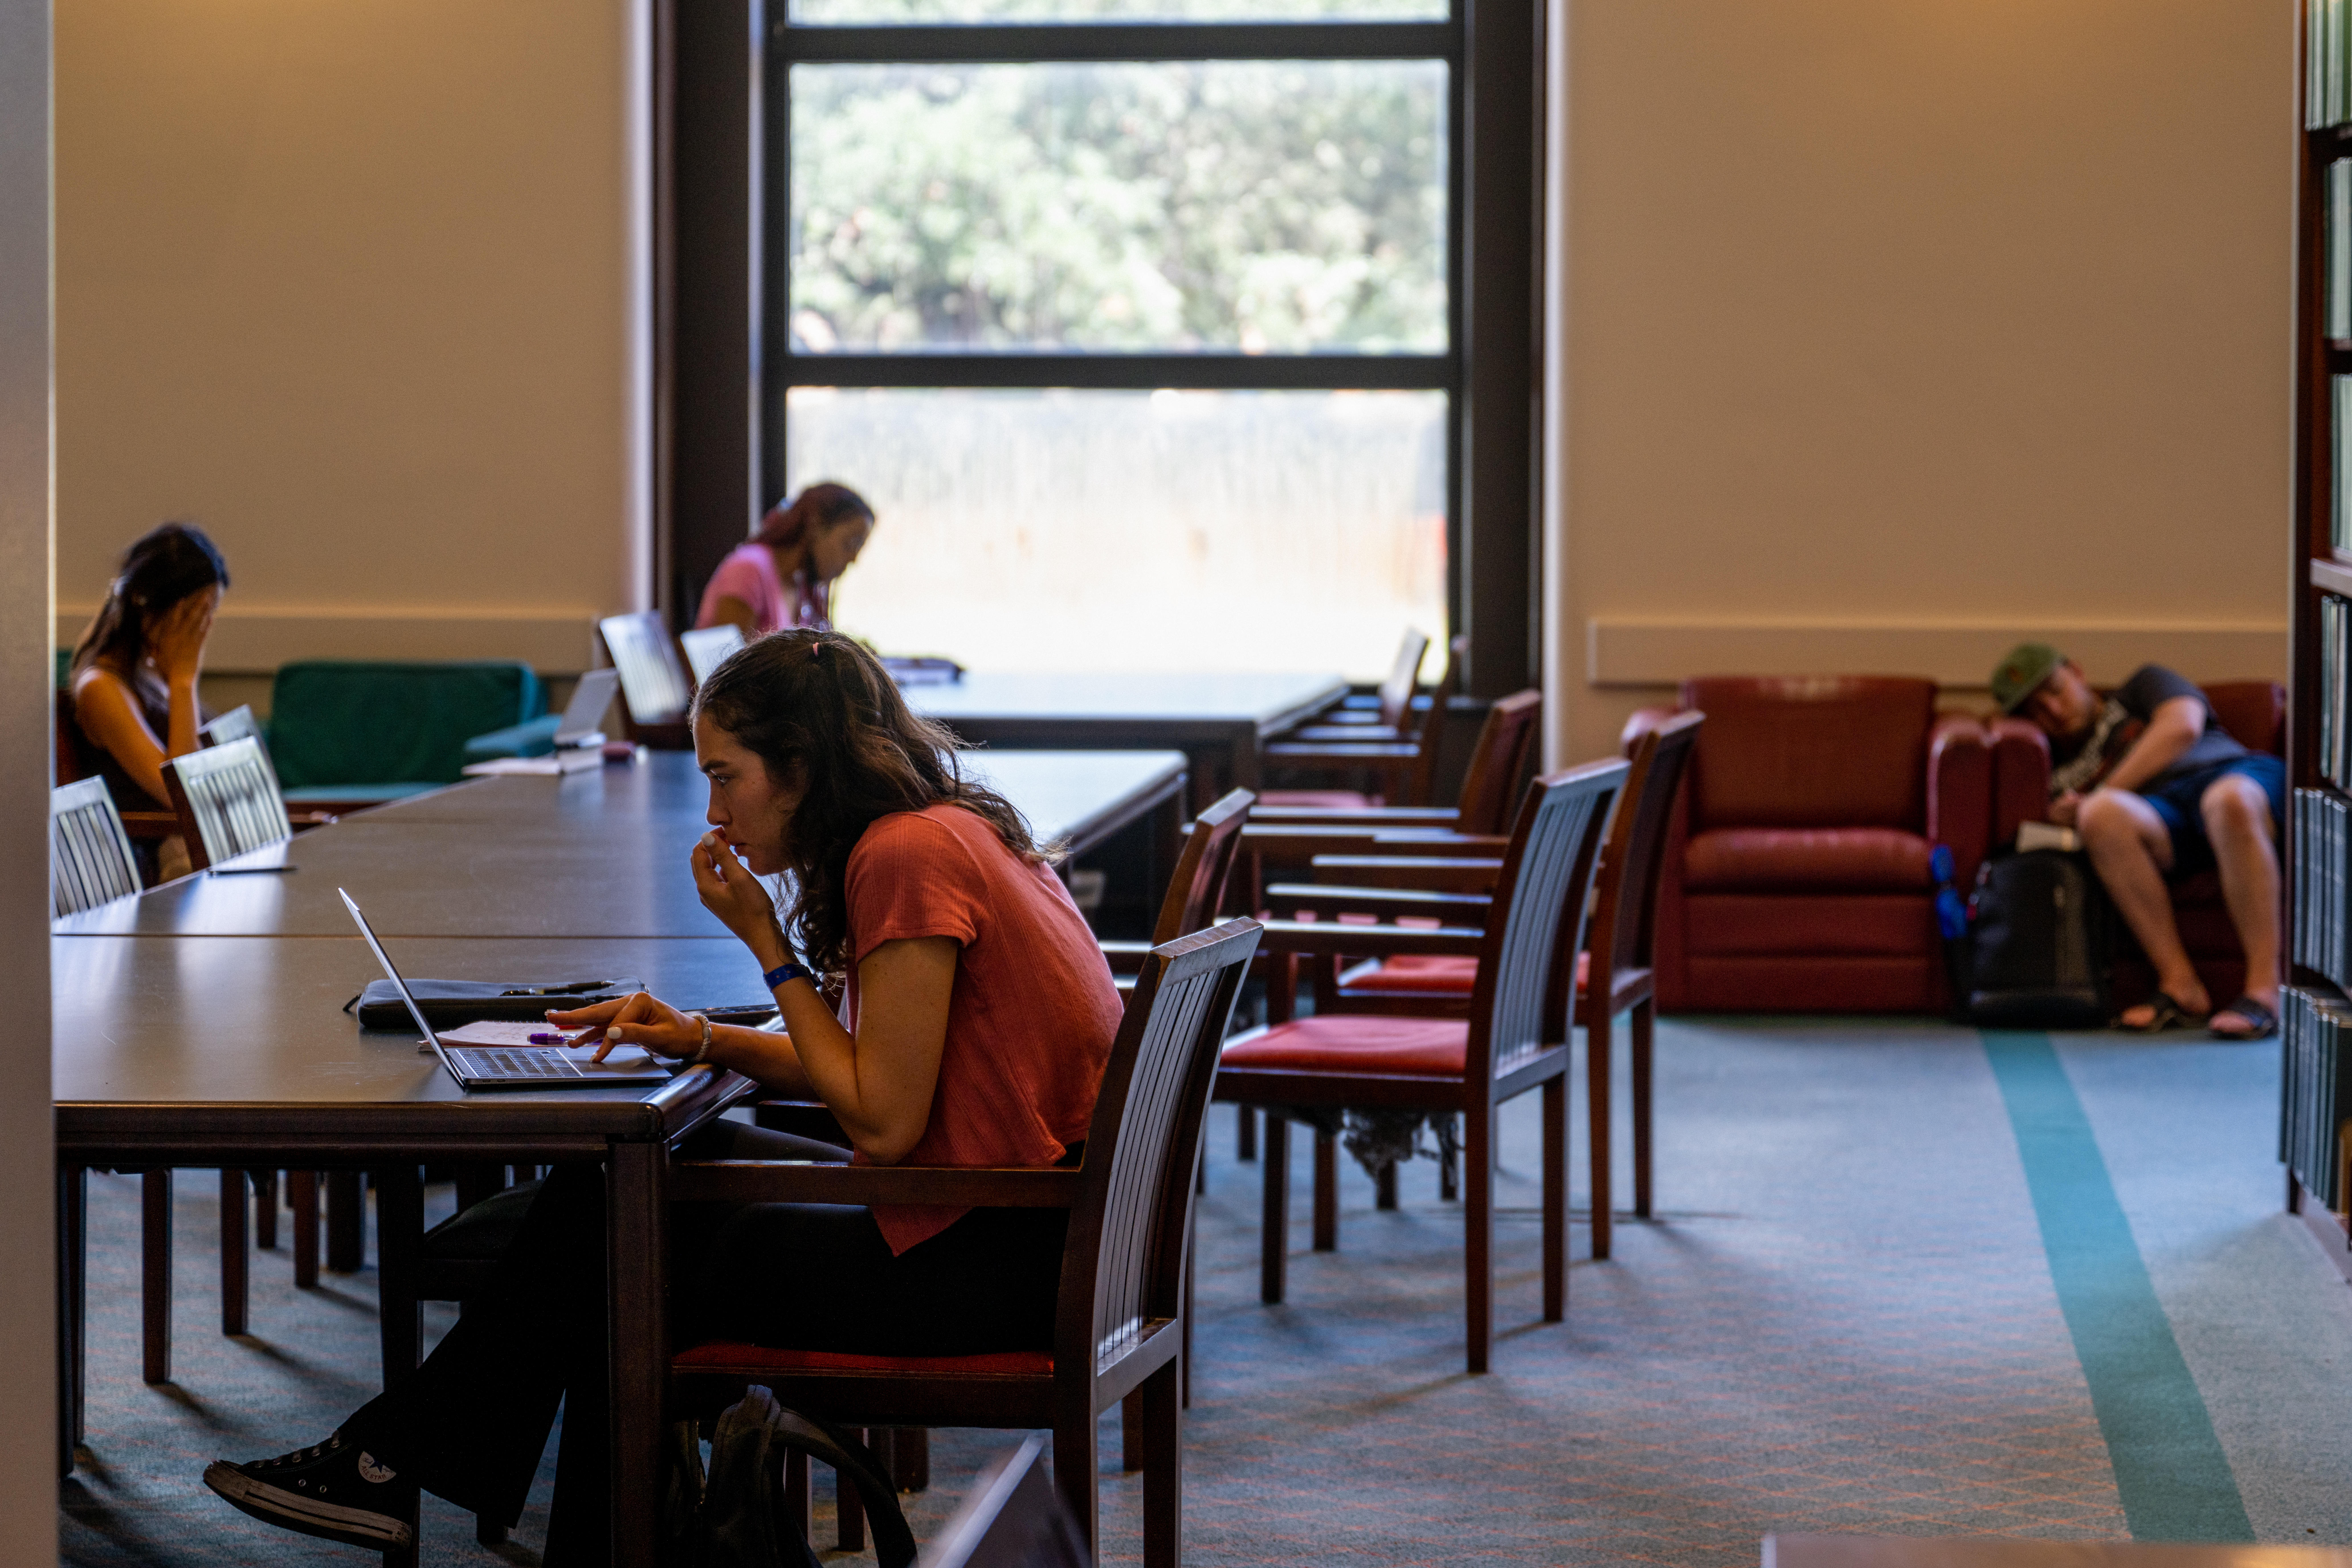 Students study in the Rice University Library on August 29, 2022 in Houston, Texas. U.S. President Joe Biden has announced a three-part plan that will forgive hundreds of billions of dollars in federal student loan debt. Since announced, the plan has sparked controversy as critics have begun questioning its fairness, and addressing concerns over its impact on inflation. (Photo by Brandon Bell/Getty Images)